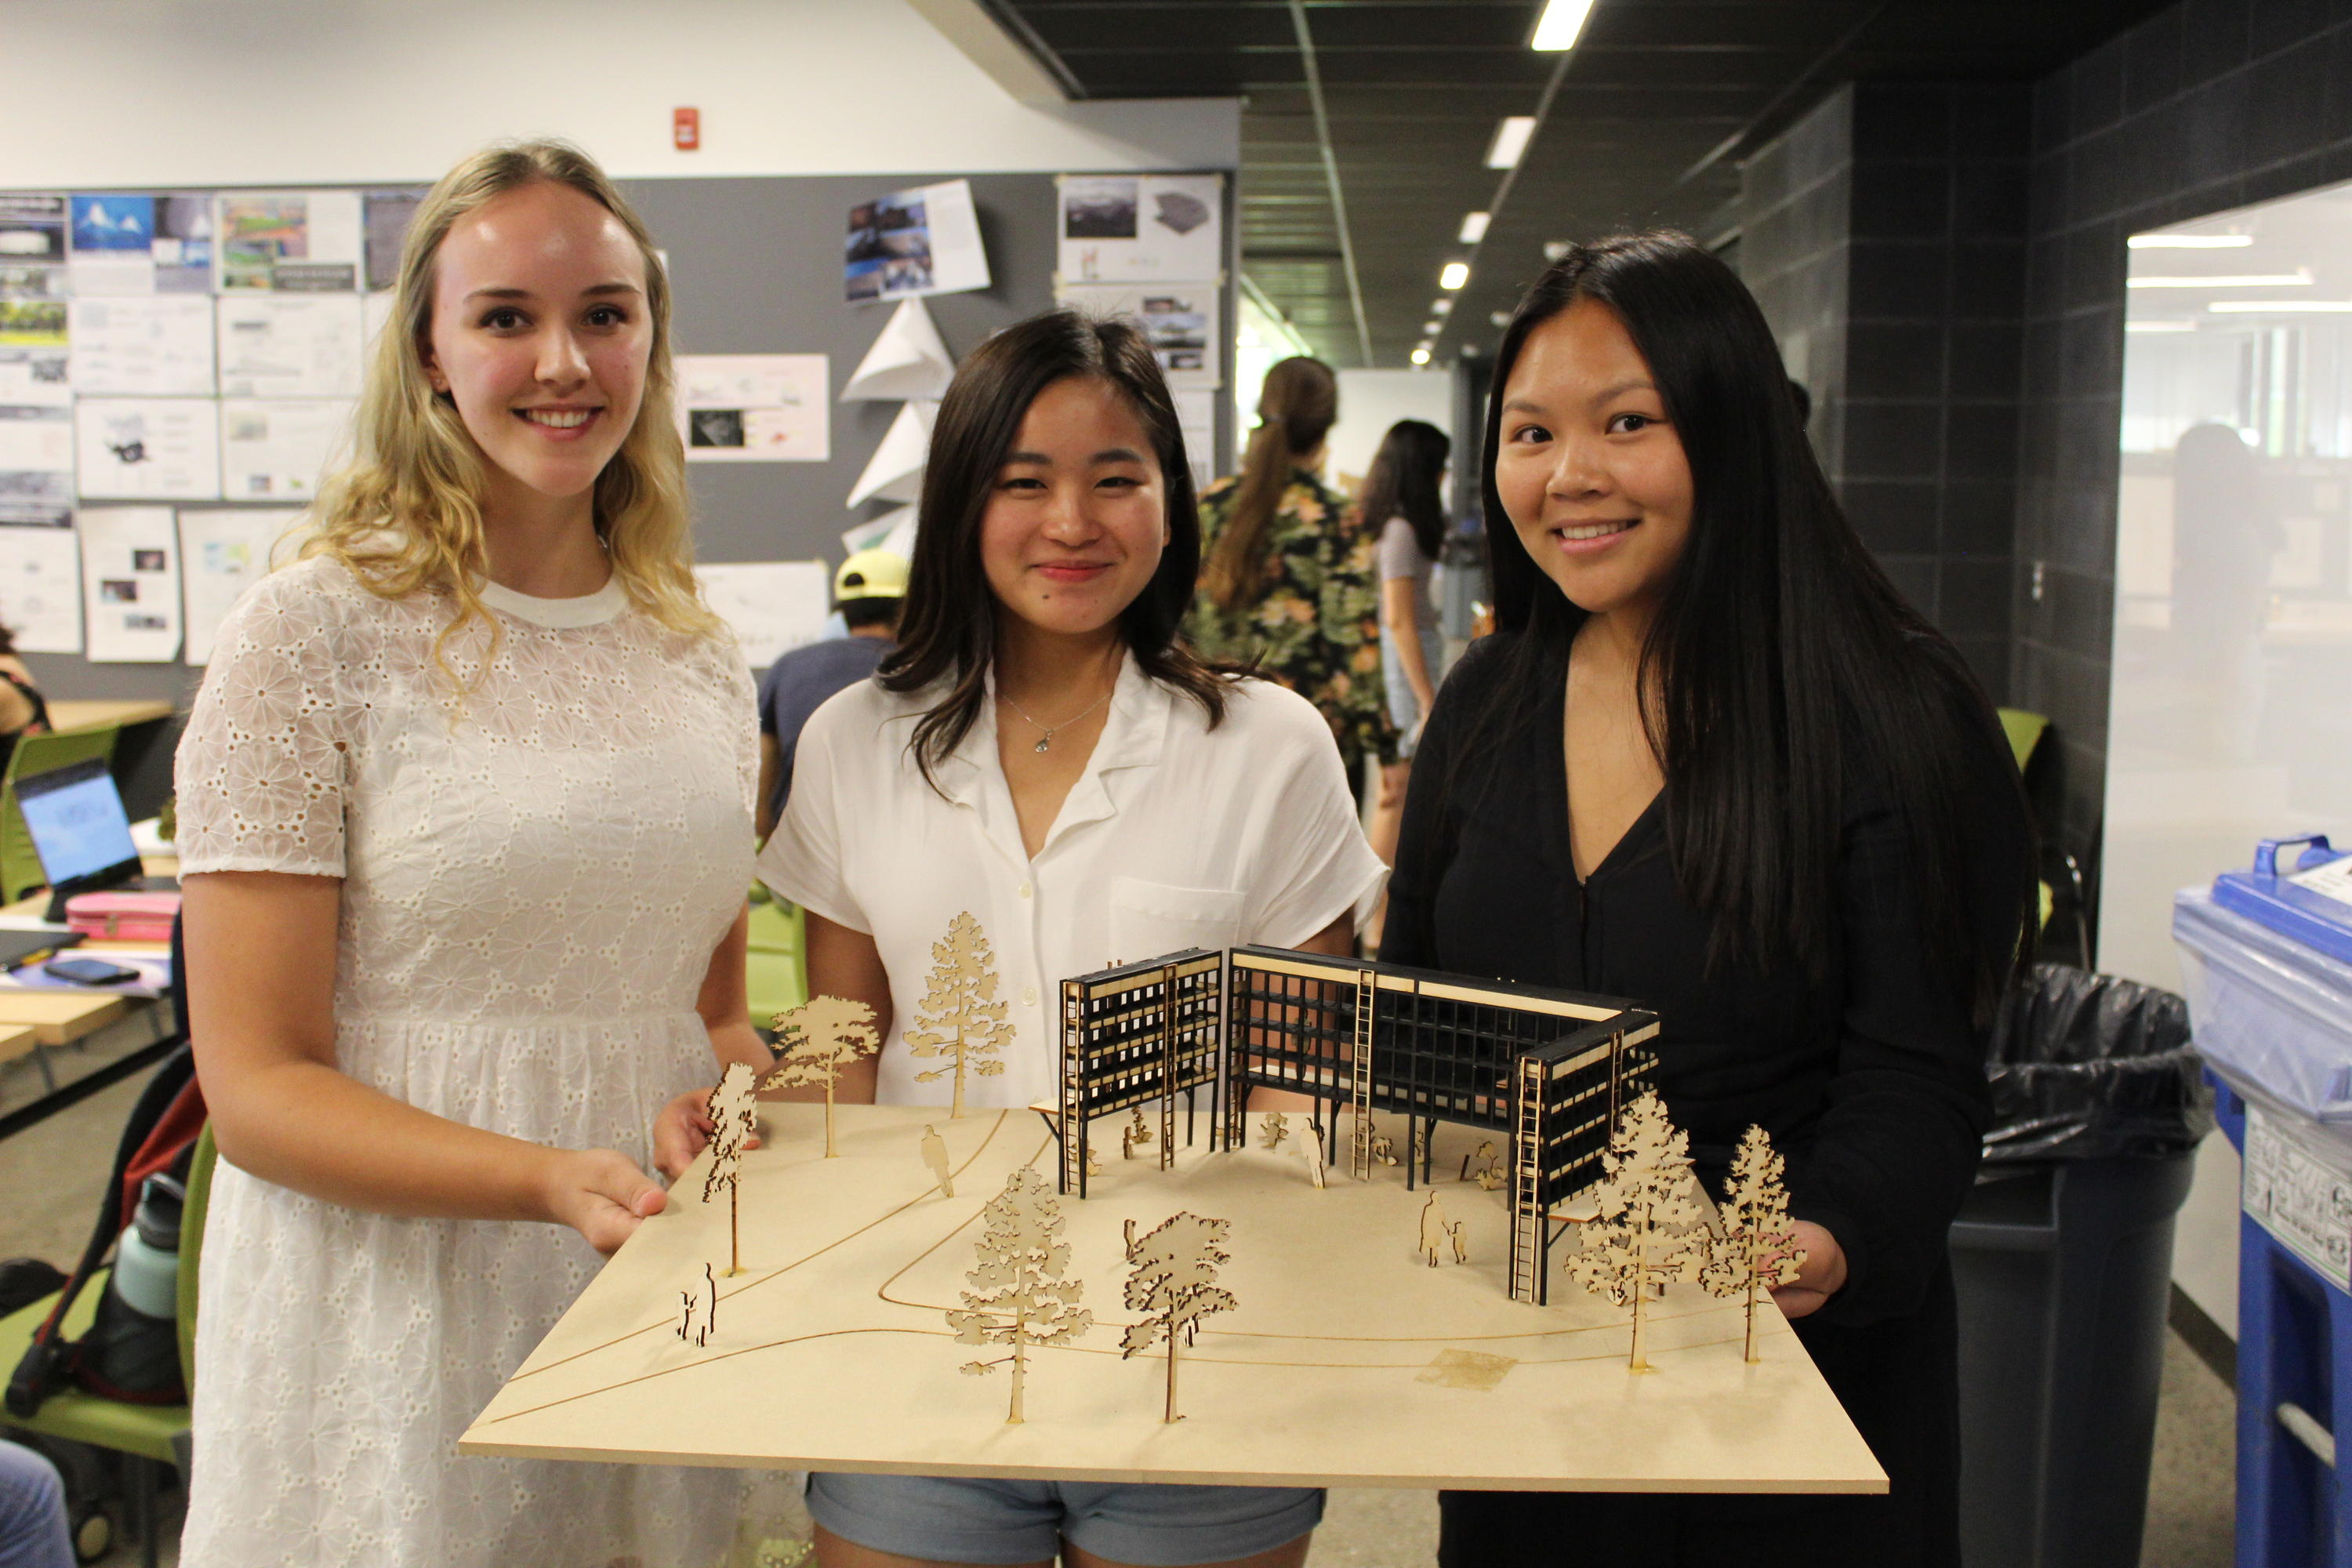 pavilion model with student group